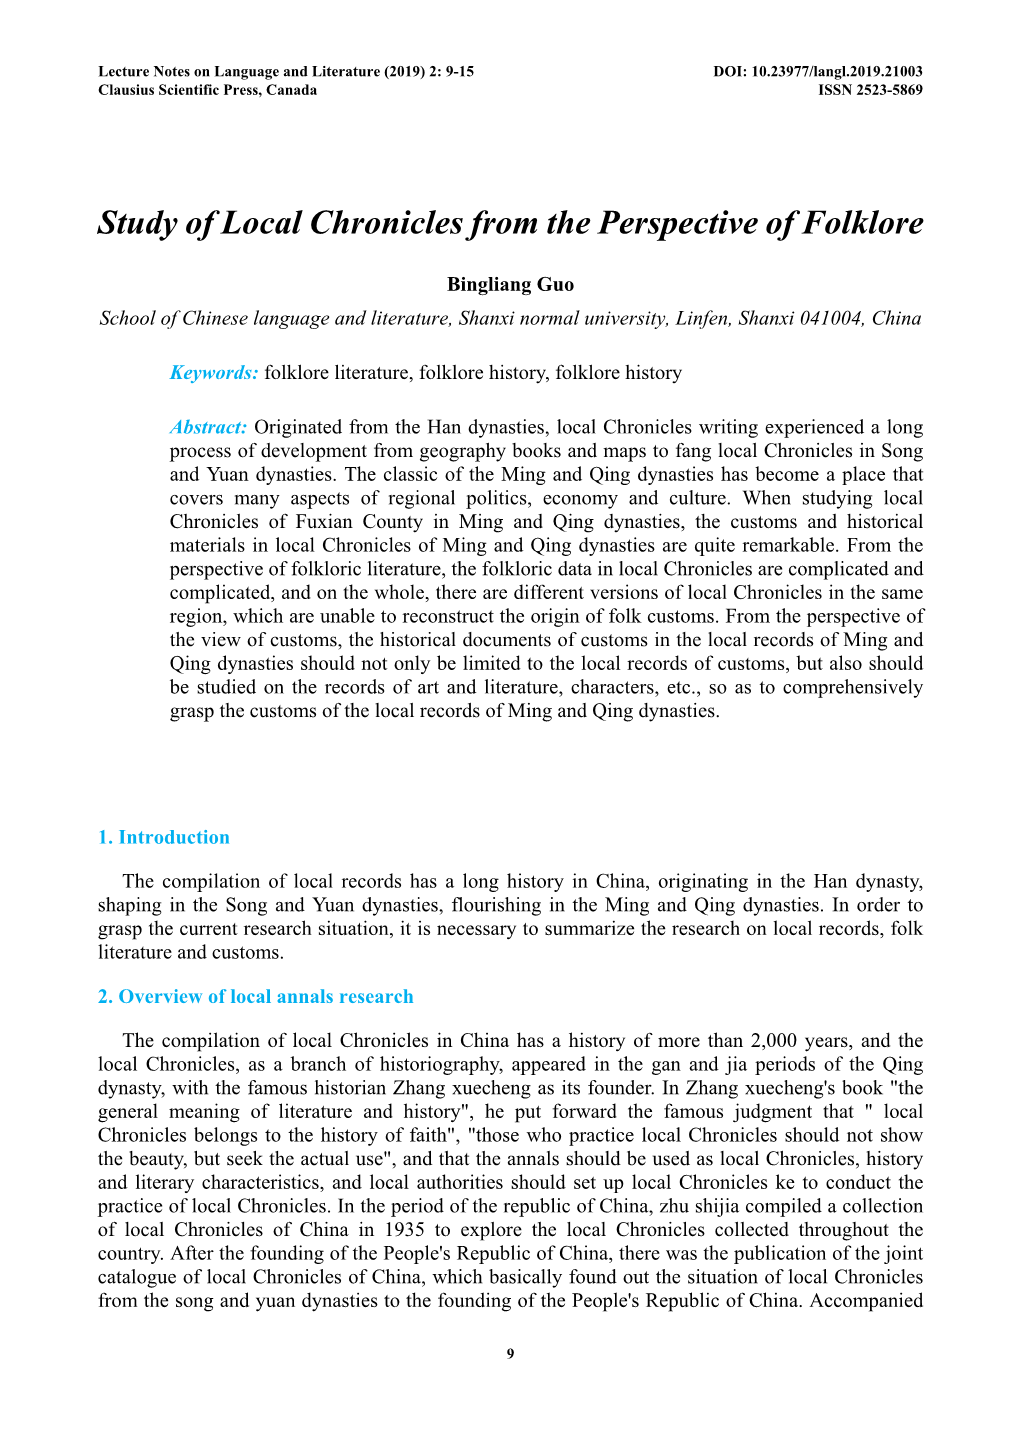 Study of Local Chronicles from the Perspective of Folklore